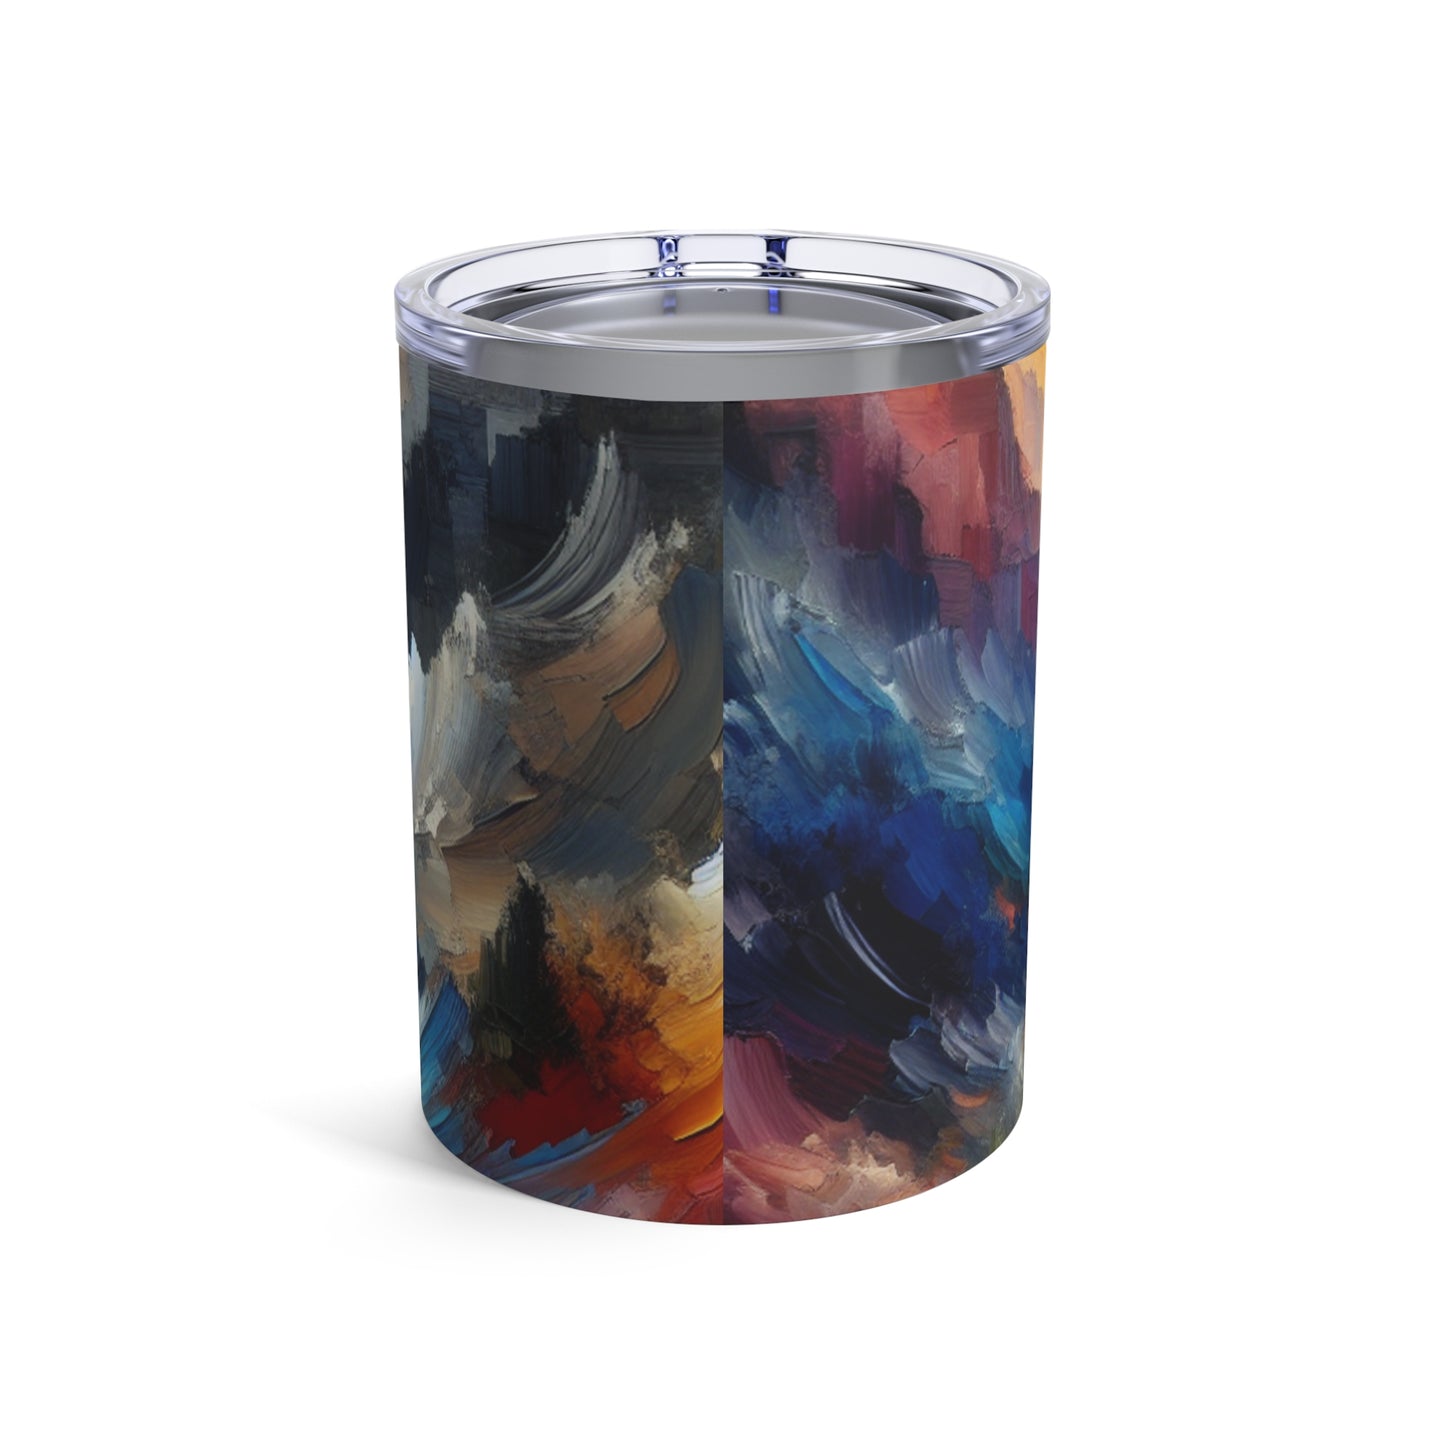 "Abstract Landscape: Exploring Emotional Depths Through Color & Texture" - The Alien Tumbler 10oz Abstract Expressionism Style